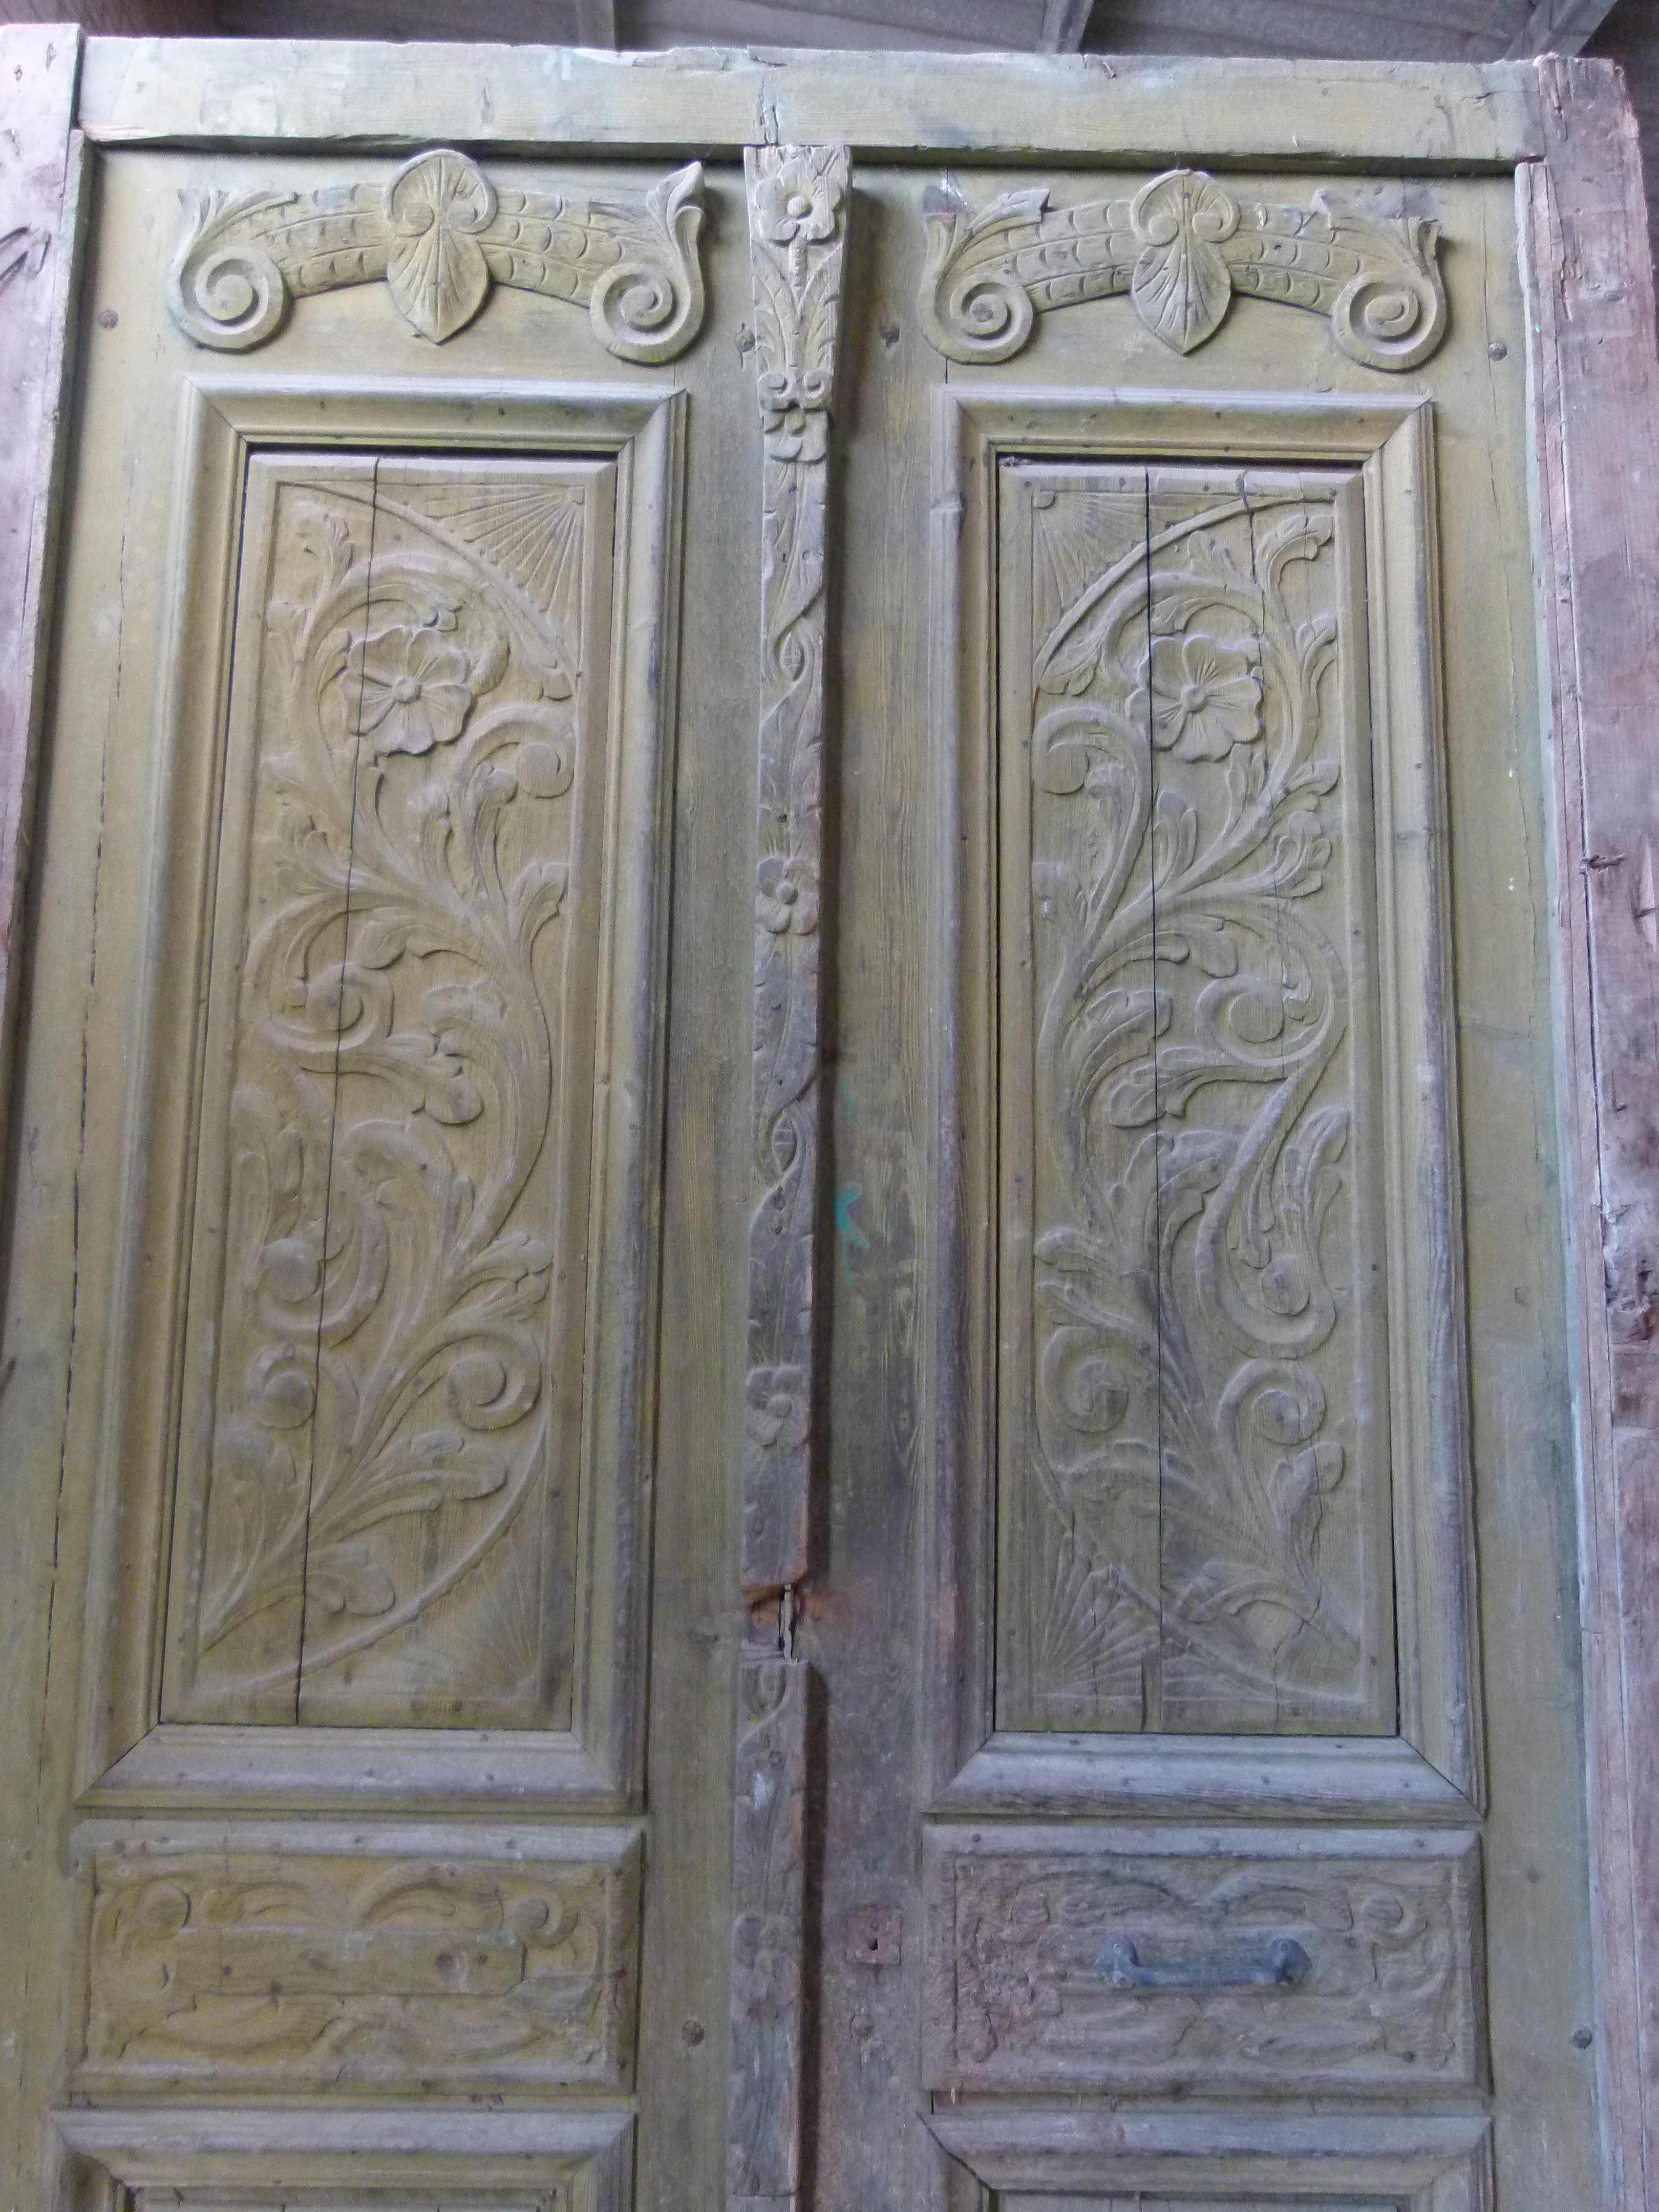 19th century double front door with patina in Art Nouveau style from Catalonien, Spain.
 Carved wood from this period.
The door is framed and working but needs some restoration as some parts are damaged.
The original patina of the door and its